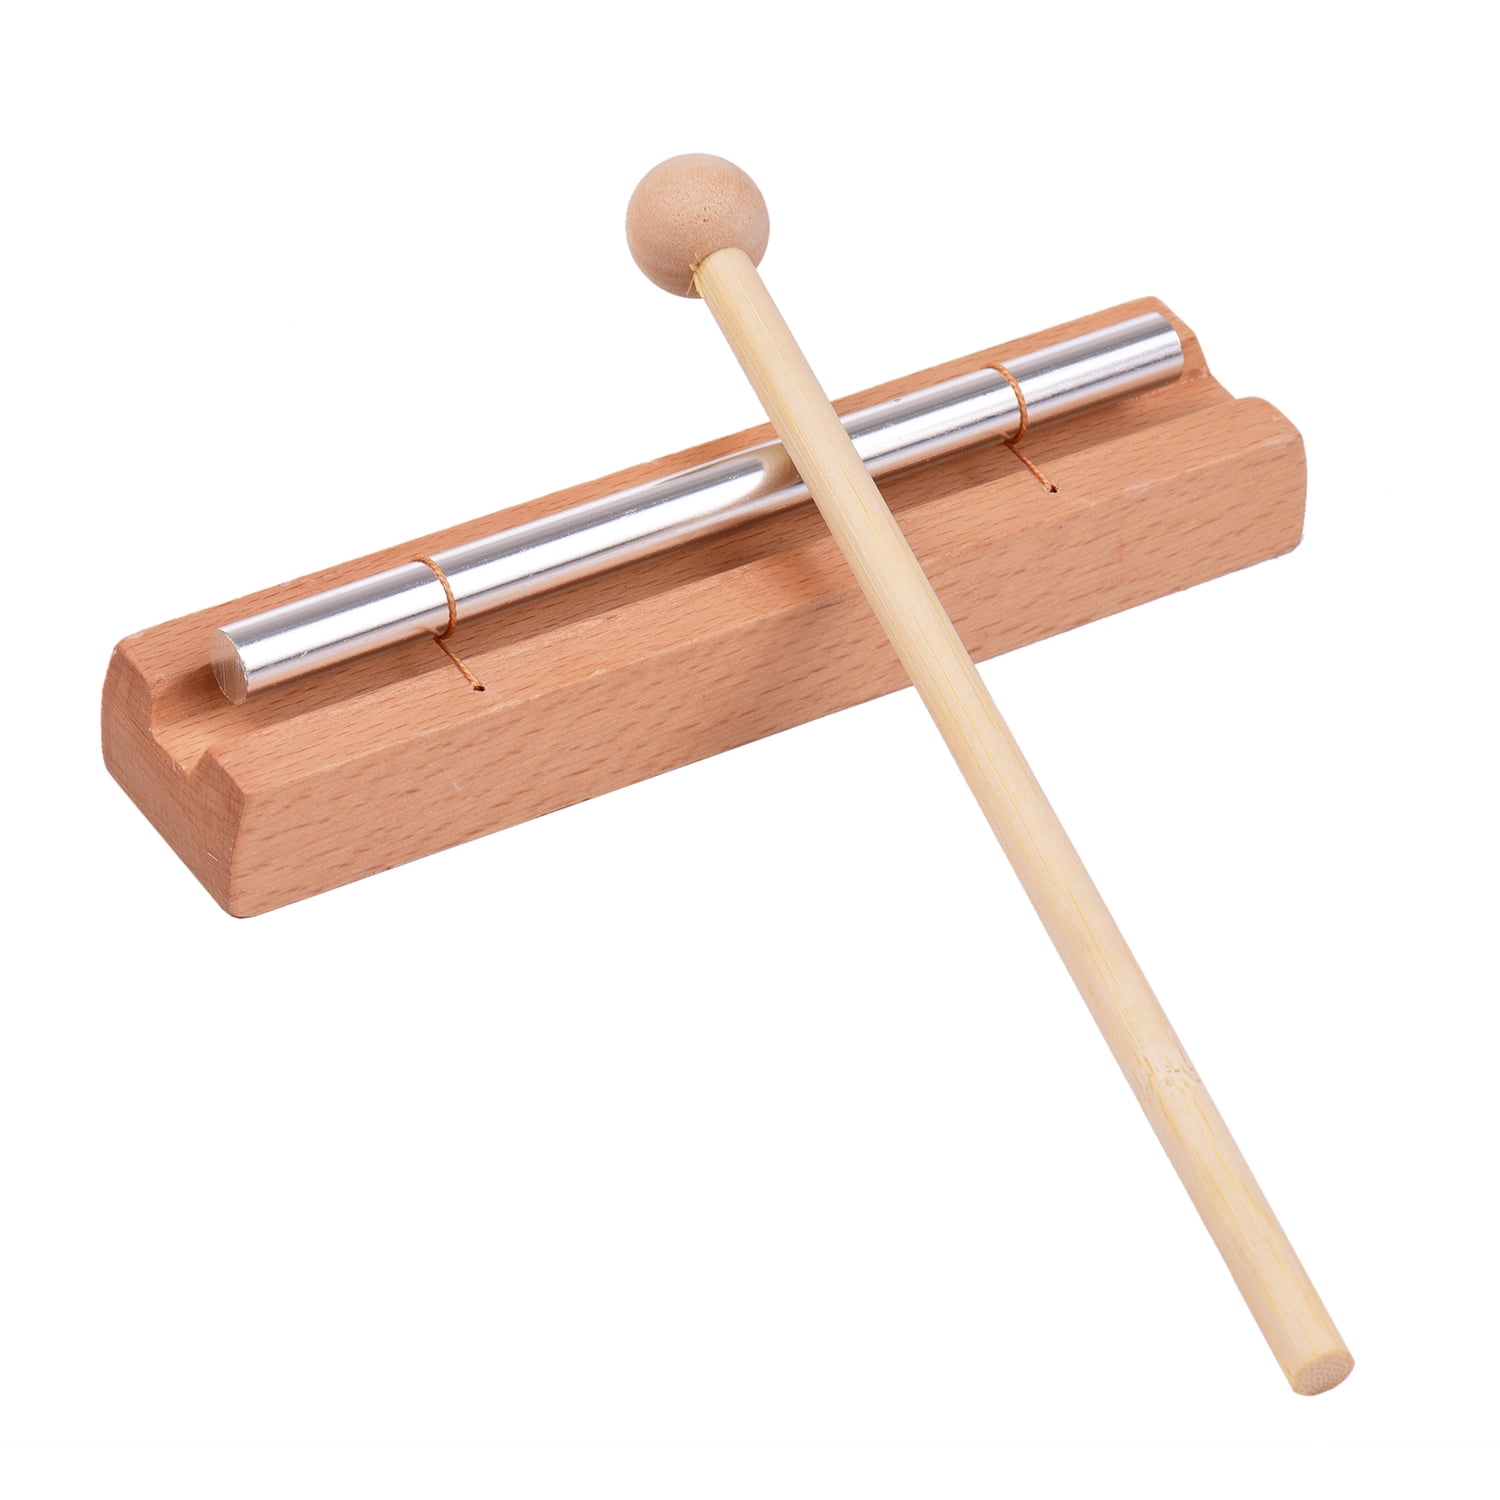 Trio Percussion Chime Instrument Meditation Trio Chime Three Tone Percussion Instrument Kid Trio Percussion Chime Instrument Educational Musical Toy 